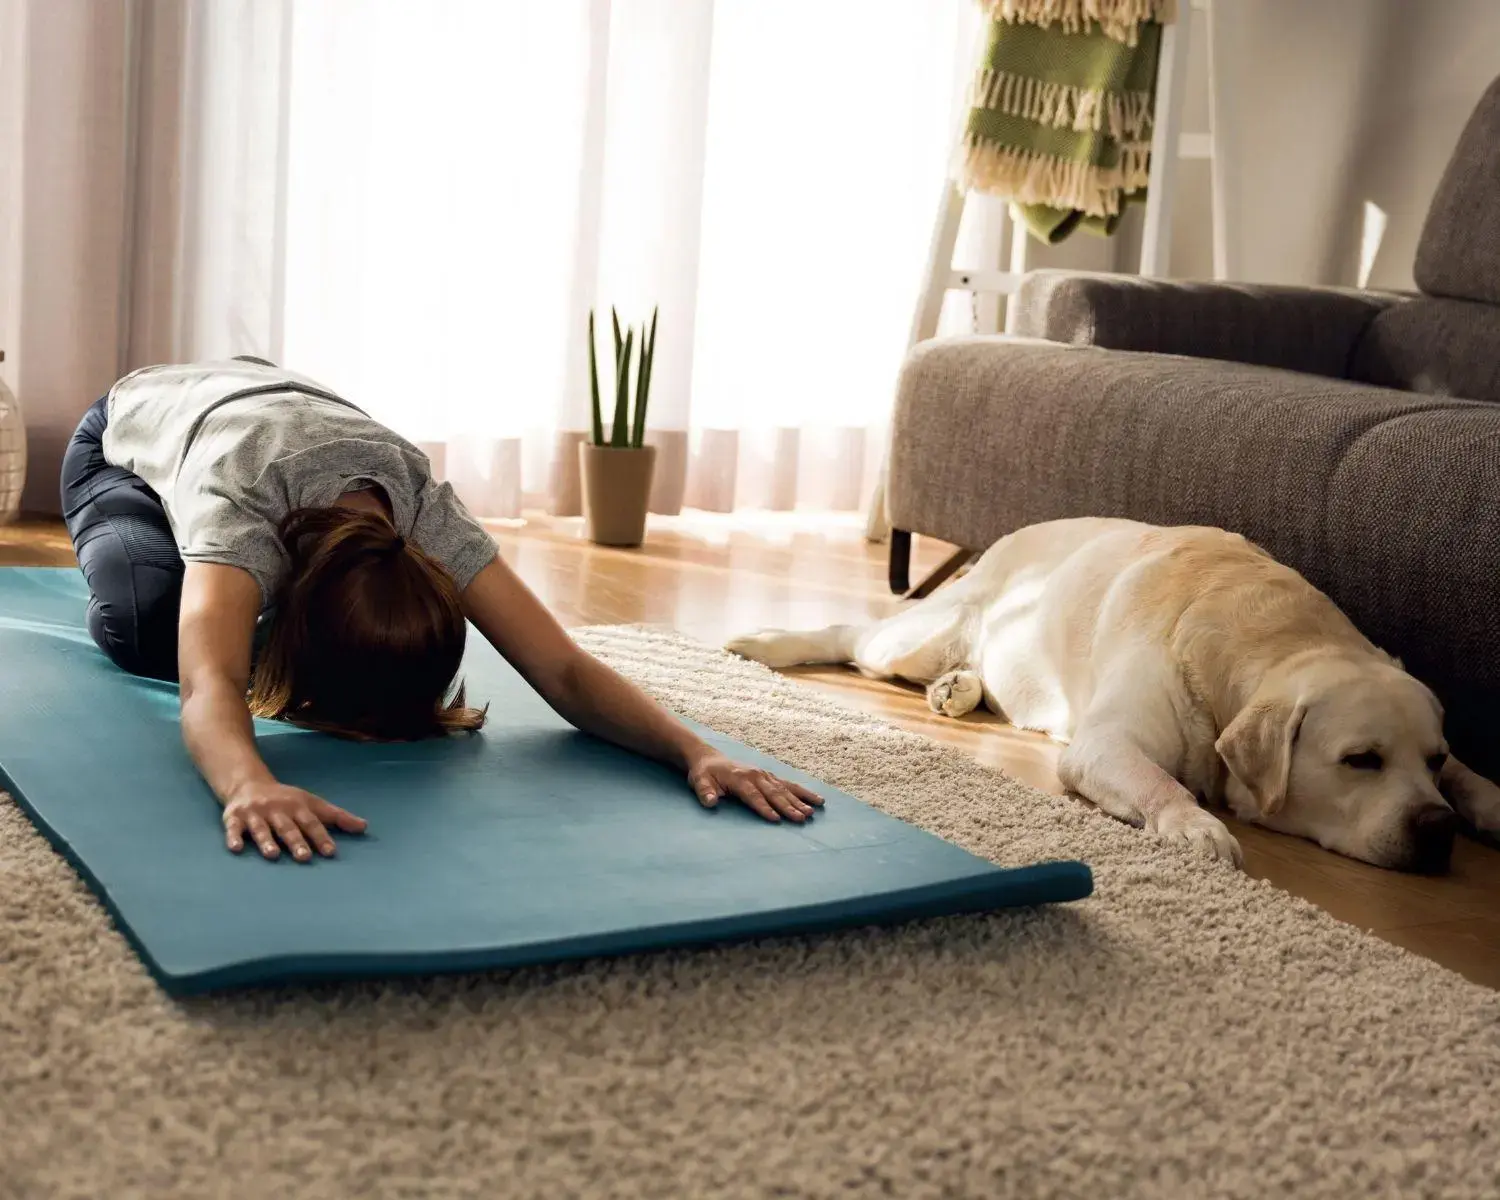 Woman on a yoga mat with golden retriever next to her